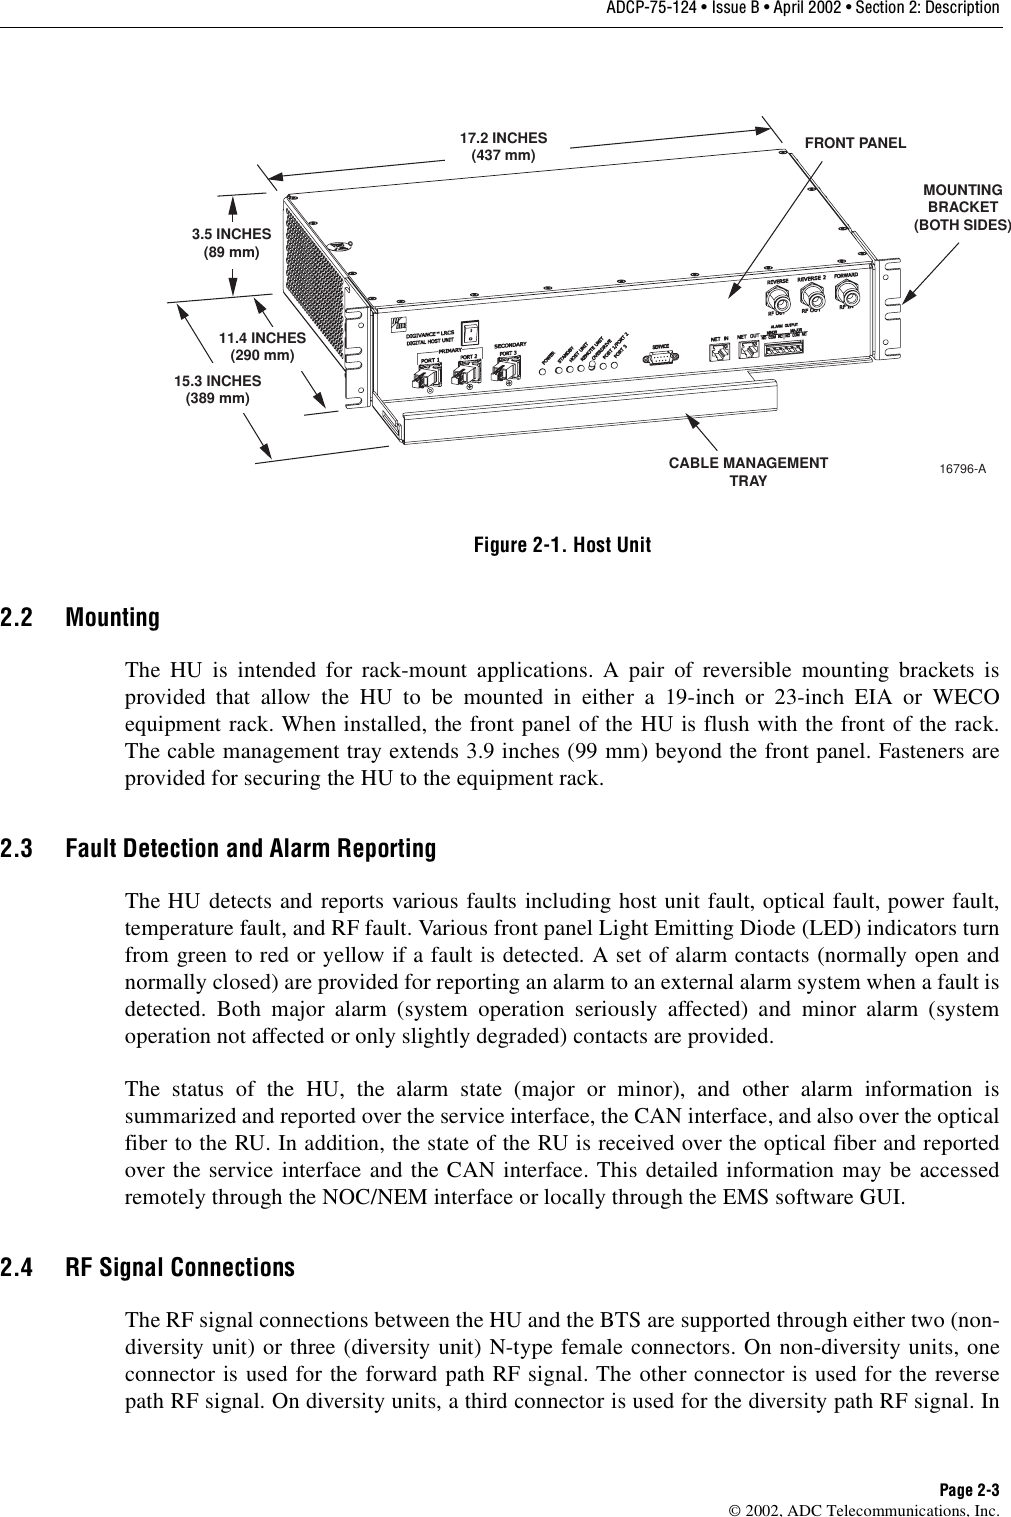 ADCP-75-124 • Issue B • April 2002 • Section 2: DescriptionPage 2-3©2002, ADC Telecommunications, Inc.Figure 2-1. Host Unit2.2 MountingThe HU is intended for rack-mount applications. Apair of reversible mounting brackets isprovided that allow the HU to be mounted in either a19-inch or 23-inch EIA or WECOequipment rack. When installed, the front panel of the HU is flush with the front of the rack.The cable management tray extends 3.9 inches (99 mm) beyond the front panel. Fasteners areprovided for securing the HU to the equipment rack.2.3 Fault Detection and Alarm ReportingThe HU detects and reports various faults including host unit fault, optical fault, power fault,temperature fault, and RF fault. Various front panel Light Emitting Diode (LED) indicators turnfrom green to red or yellow if afault is detected. Aset of alarm contacts (normally open andnormally closed) are provided for reporting an alarm to an external alarm system when afault isdetected. Both major alarm (system operation seriously affected) and minor alarm (systemoperation not affected or only slightly degraded) contacts are provided.The status of the HU, the alarm state (major or minor), and other alarm information issummarized and reported over the service interface, the CAN interface, and also over the opticalfiber to the RU. In addition, the state of the RU is received over the optical fiber and reportedover the service interface and the CAN interface. This detailed information may be accessedremotely through the NOC/NEM interface or locally through the EMS software GUI.2.4 RF Signal ConnectionsThe RF signal connections between the HU and the BTS are supported through either two (non-diversity unit) or three (diversity unit) N-type female connectors. On non-diversity units, oneconnector is used for the forward path RF signal. The other connector is used for the reversepath RF signal. On diversity units, athird connector is used for the diversity path RF signal. In17.2 INCHES(437 mm)3.5 INCHES(89 mm)11.4 INCHES(290 mm)15.3 INCHES(389 mm)FRONT PANELCABLE MANAGEMENTTRAYMOUNTINGBRACKET(BOTH SIDES)16796-A